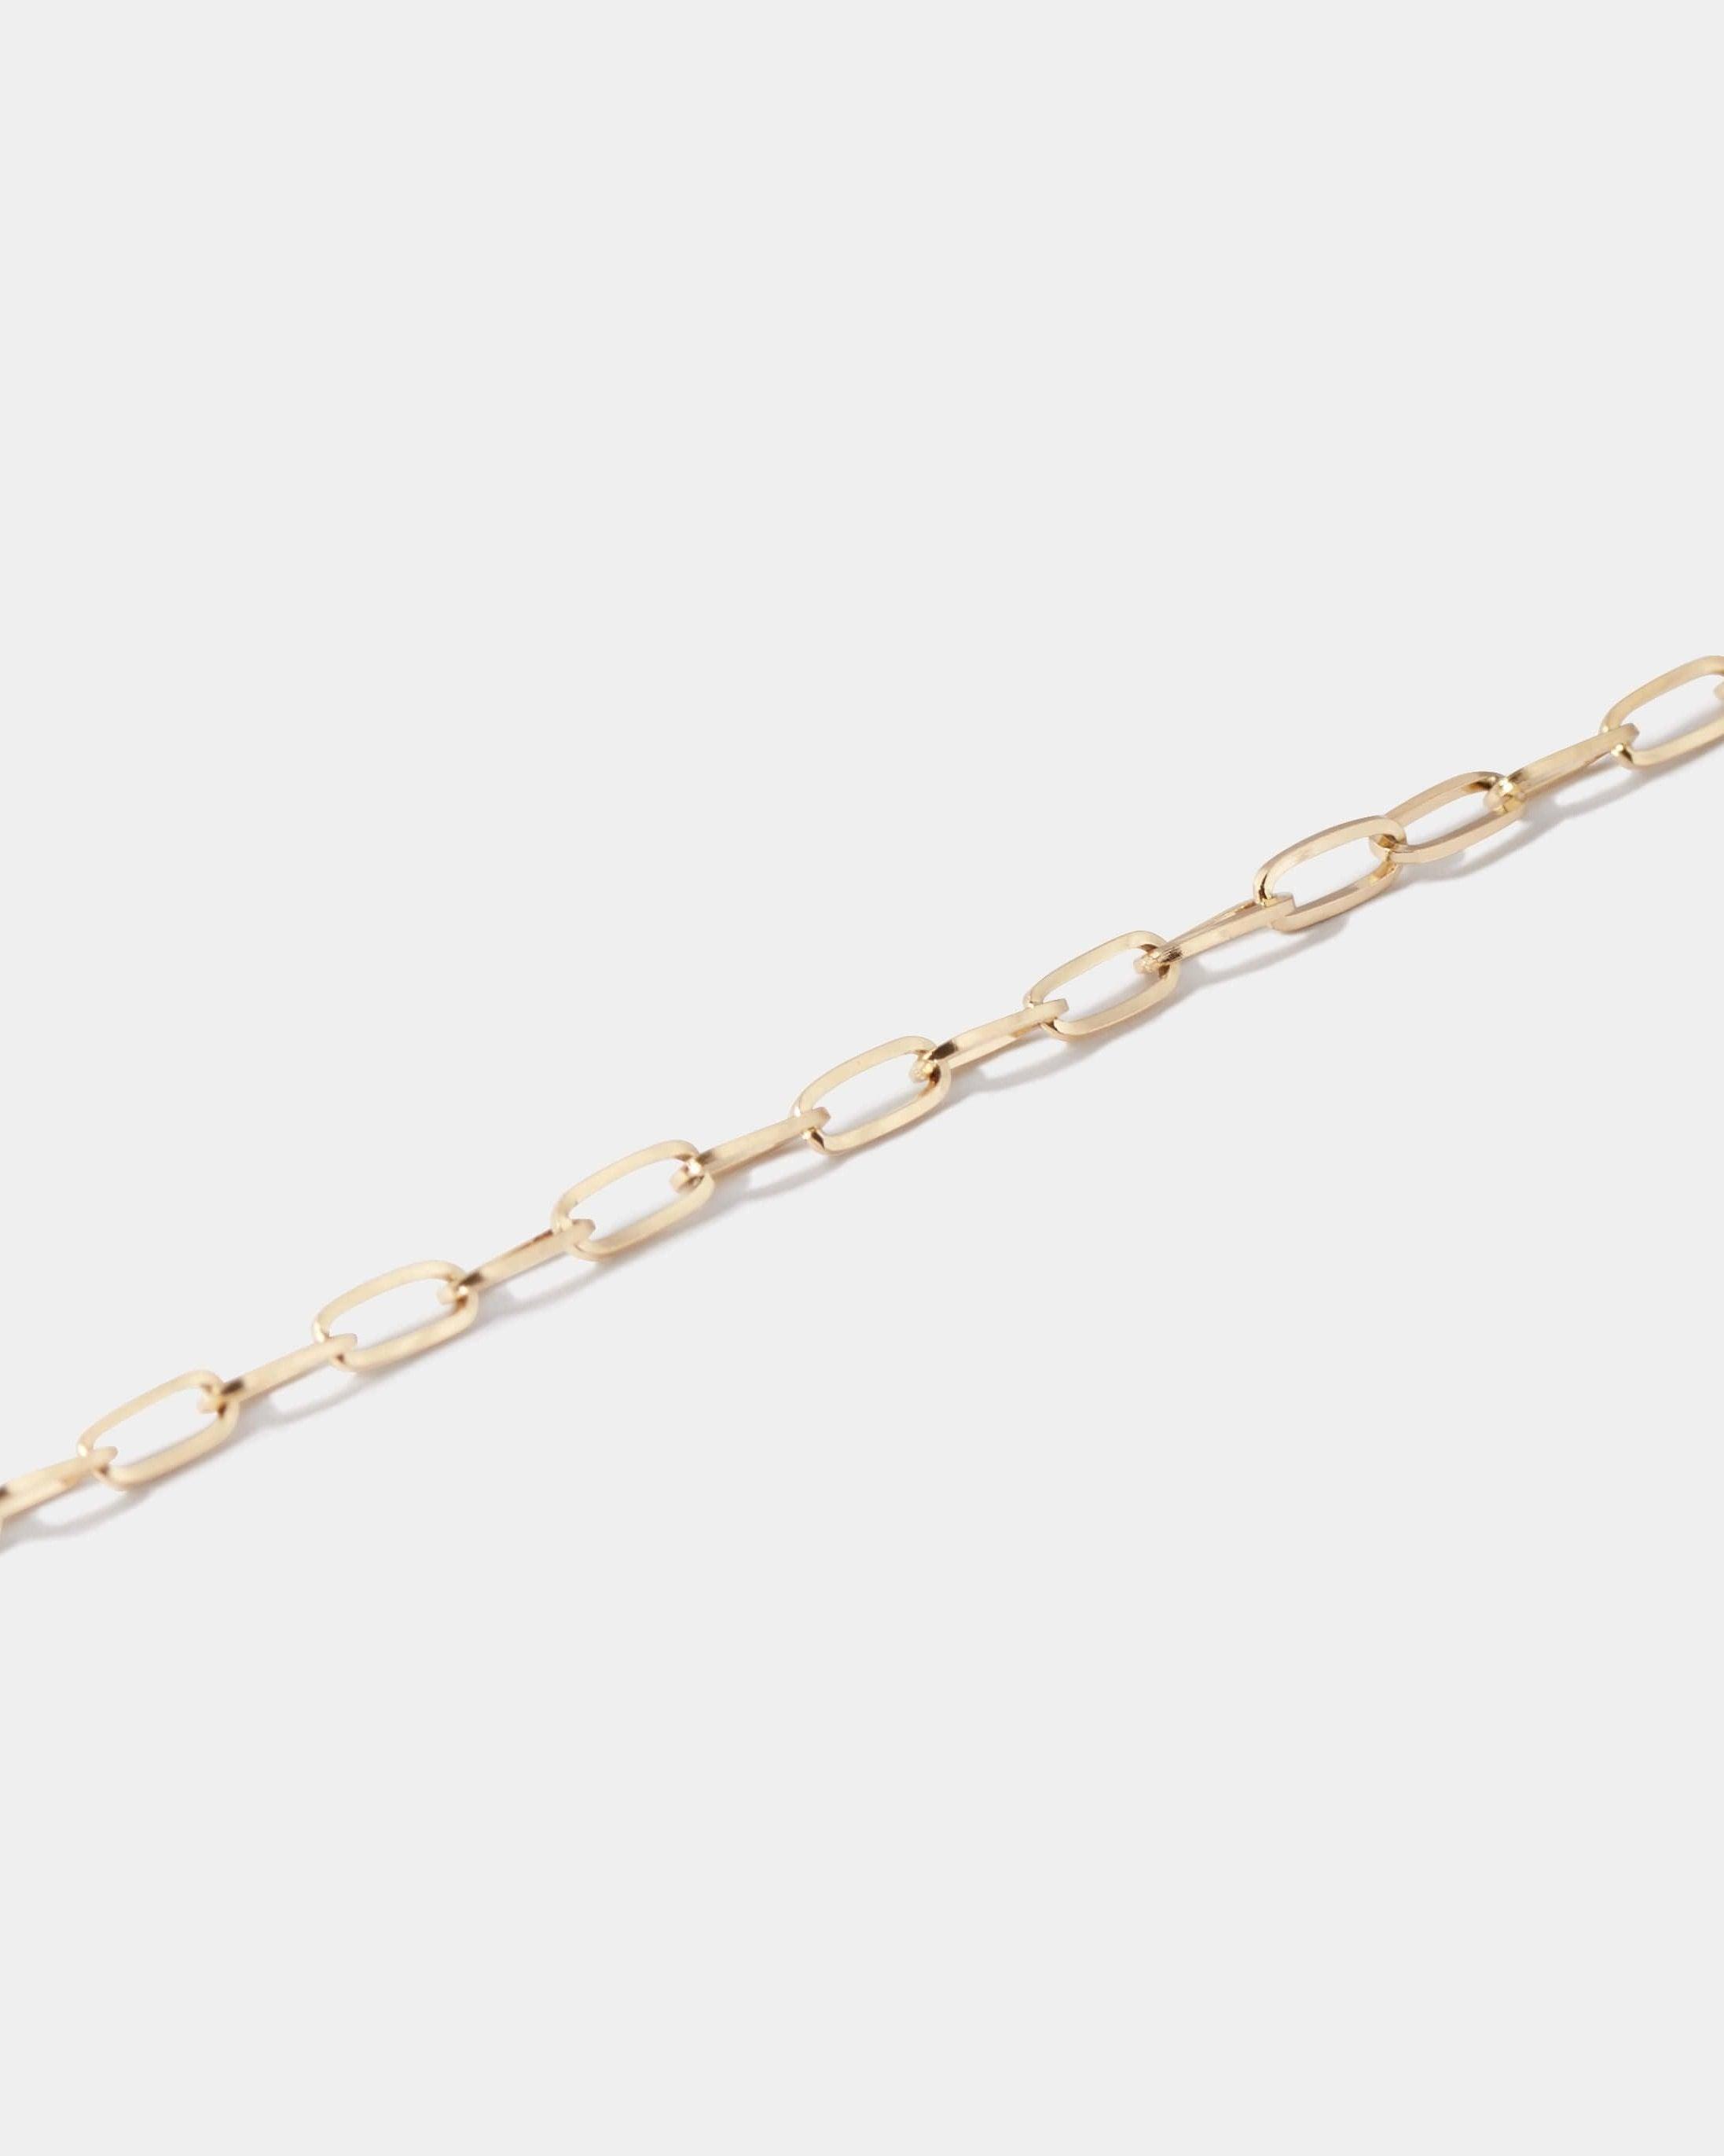 NARROW BOX CHAIN NECKLACE - LIMELY